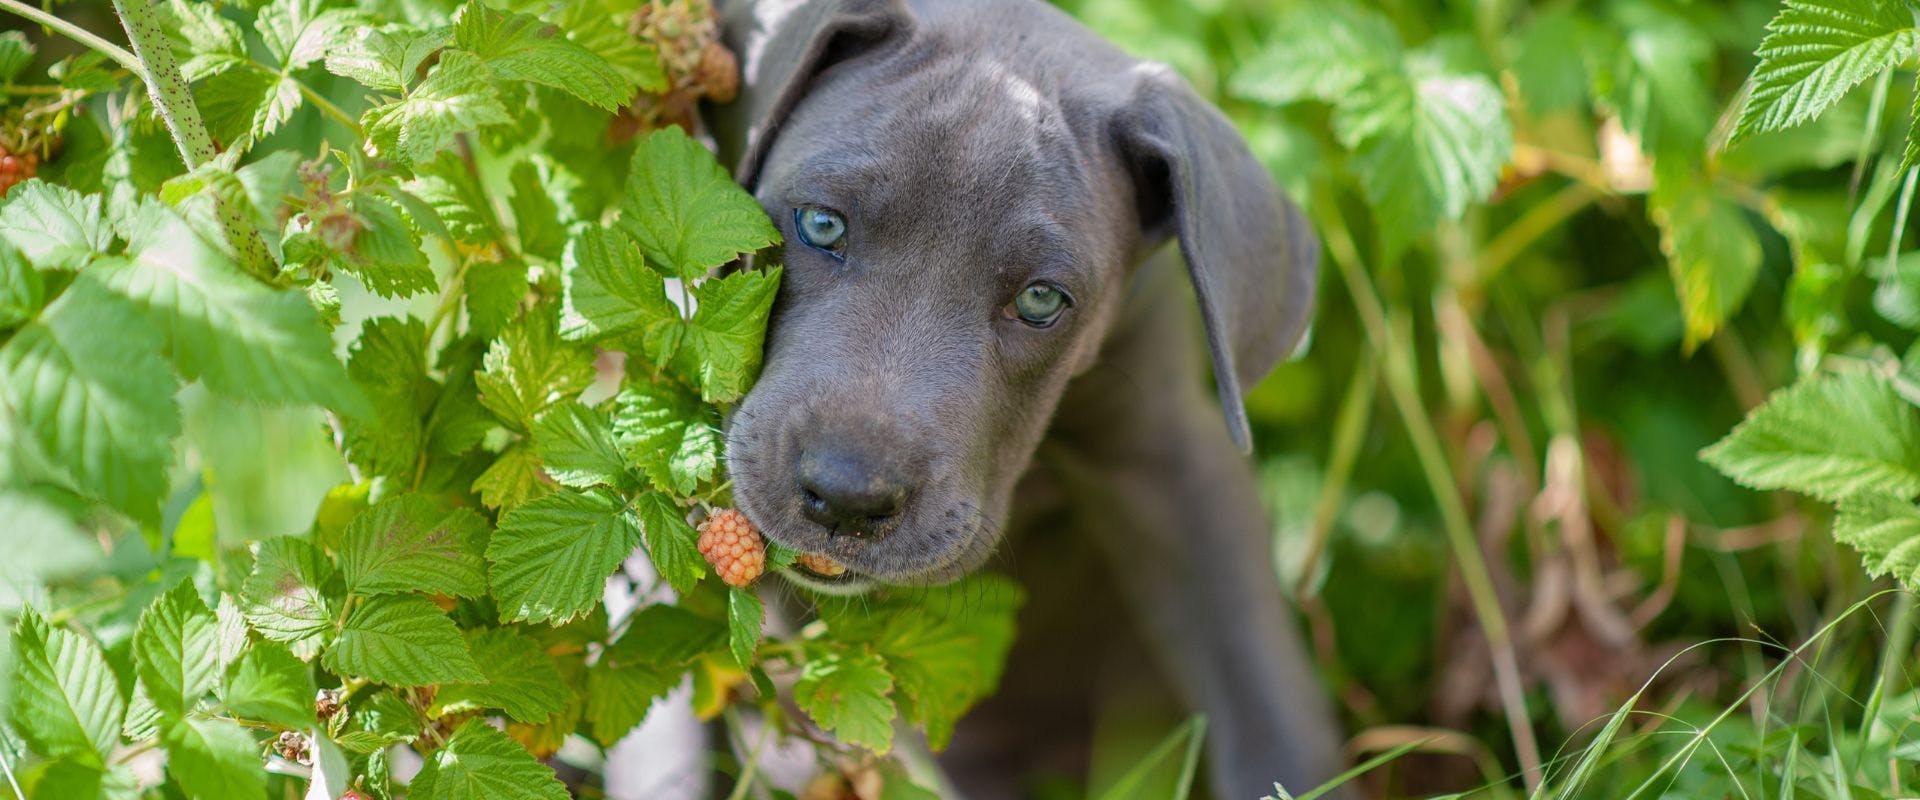 Grey dog eating a raspberry from the plant